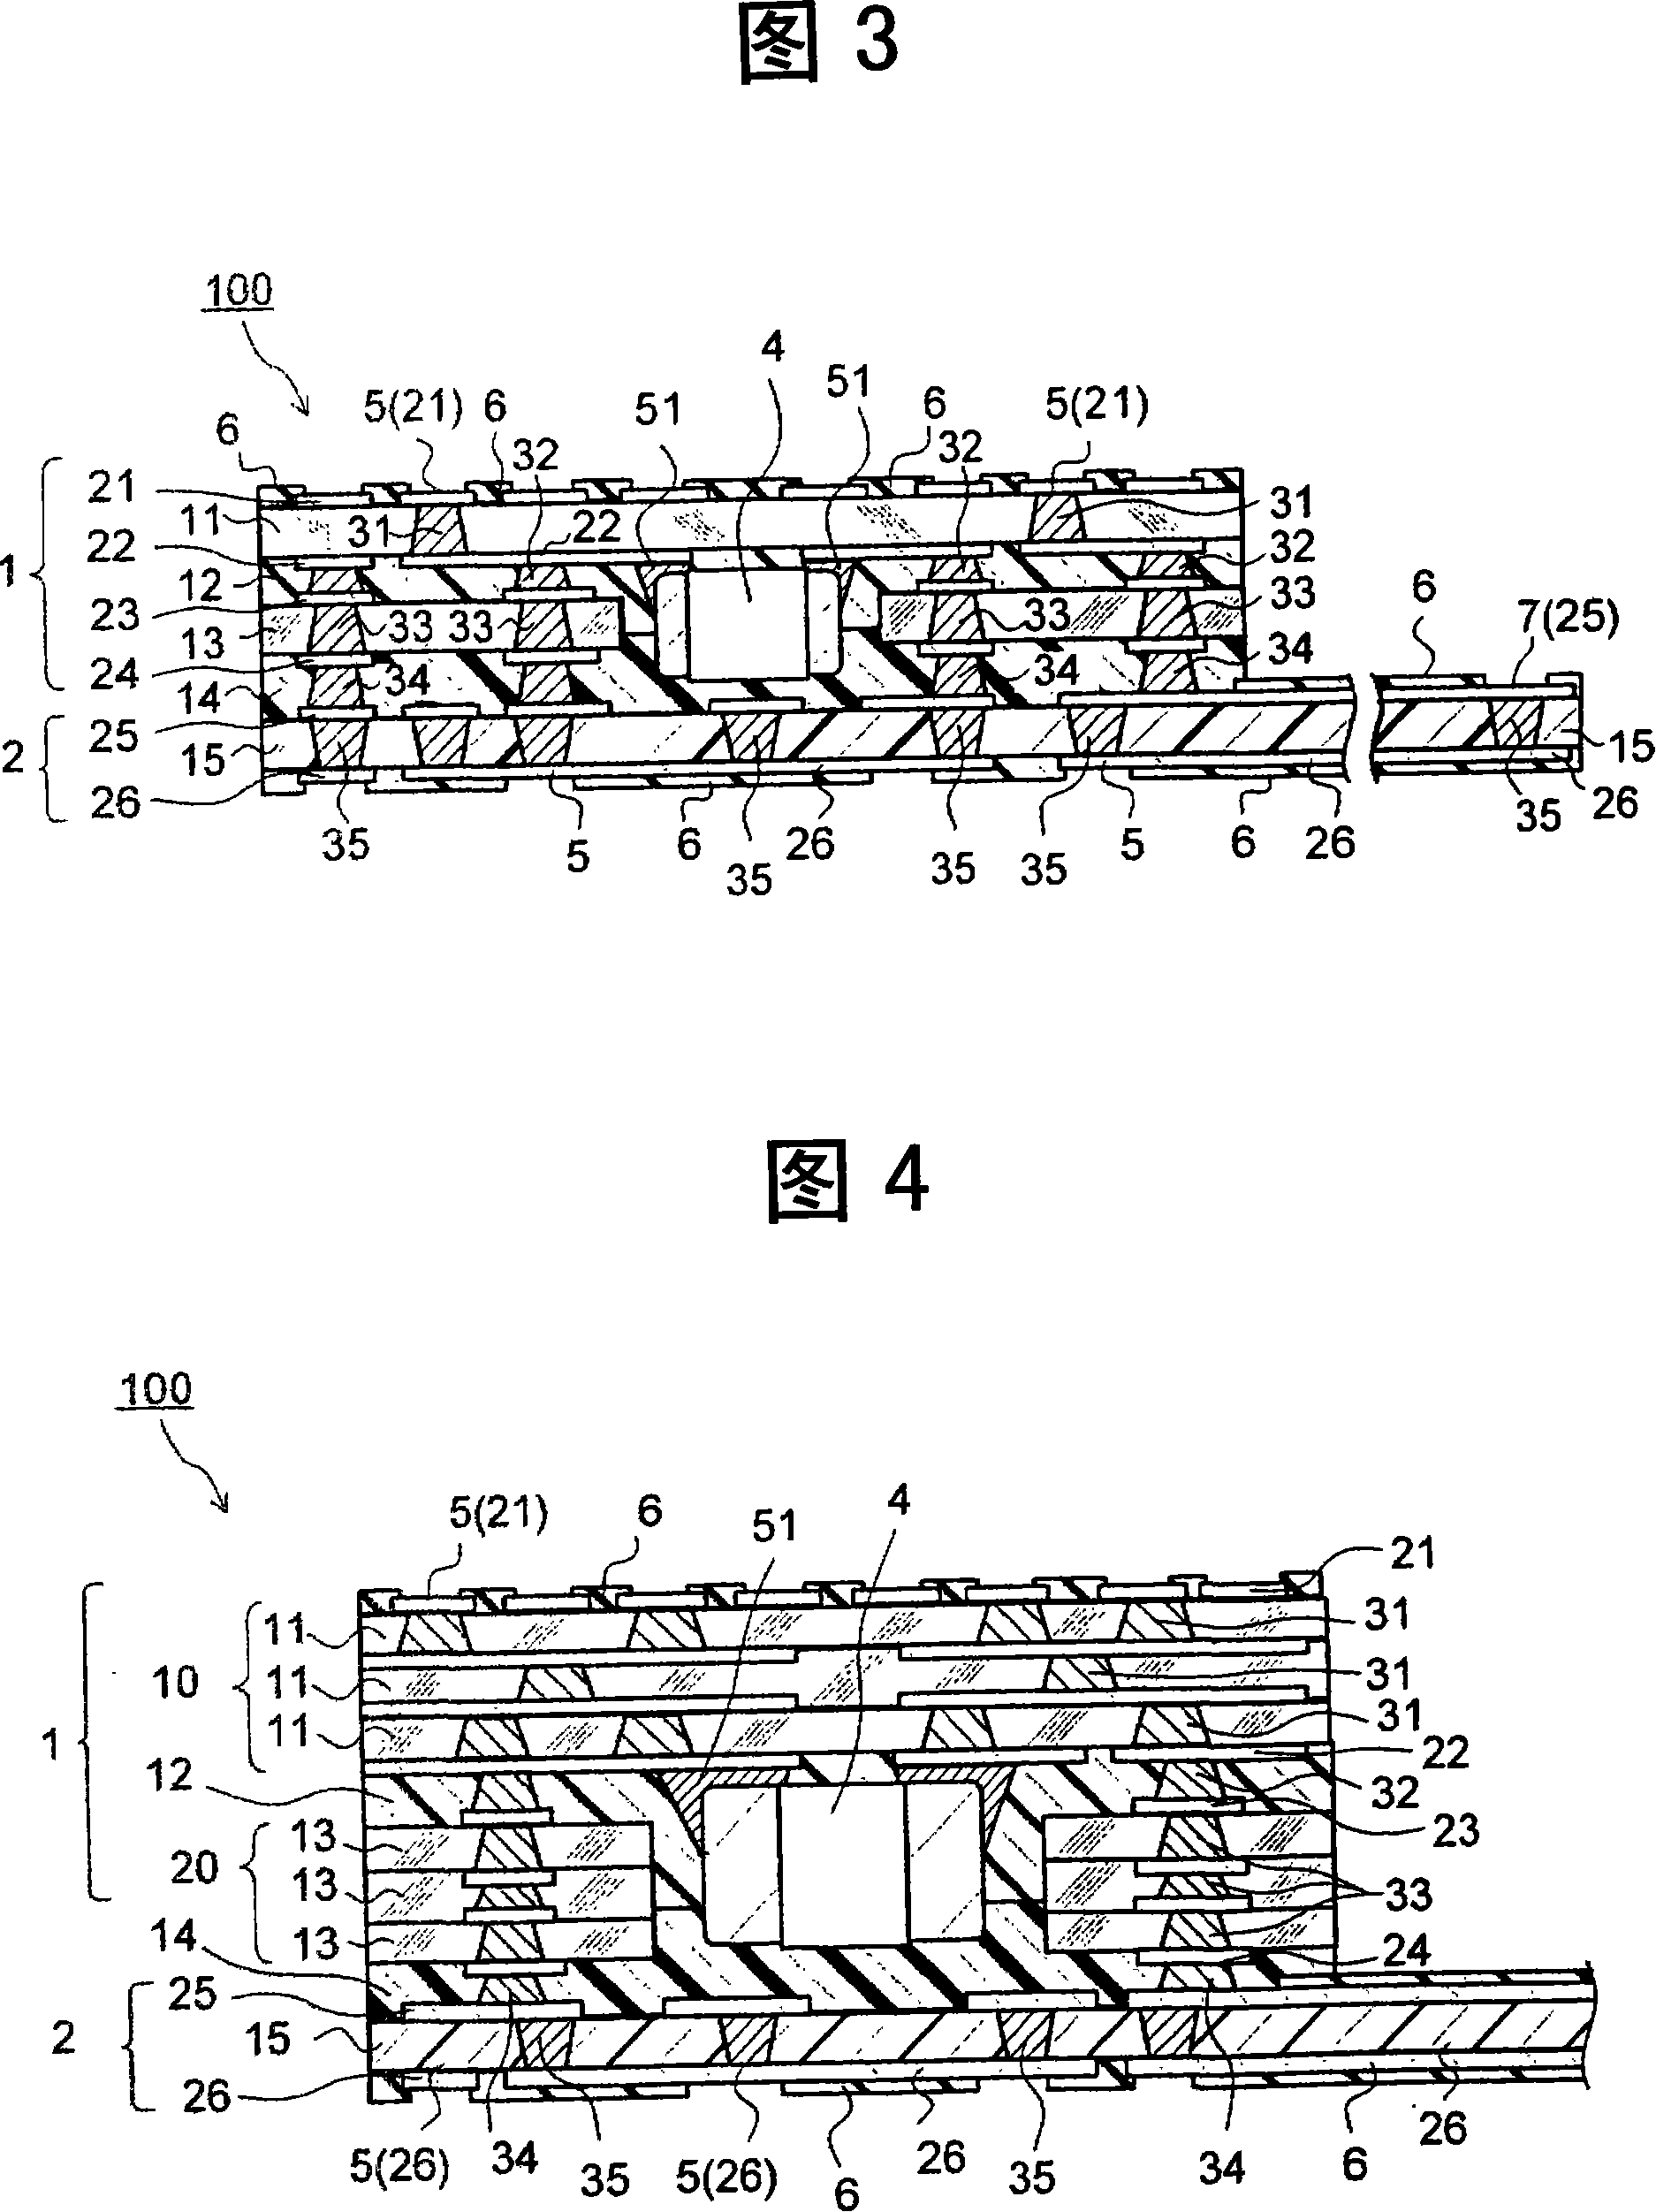 Multilayered printed wiring board and method for manufacturing the same